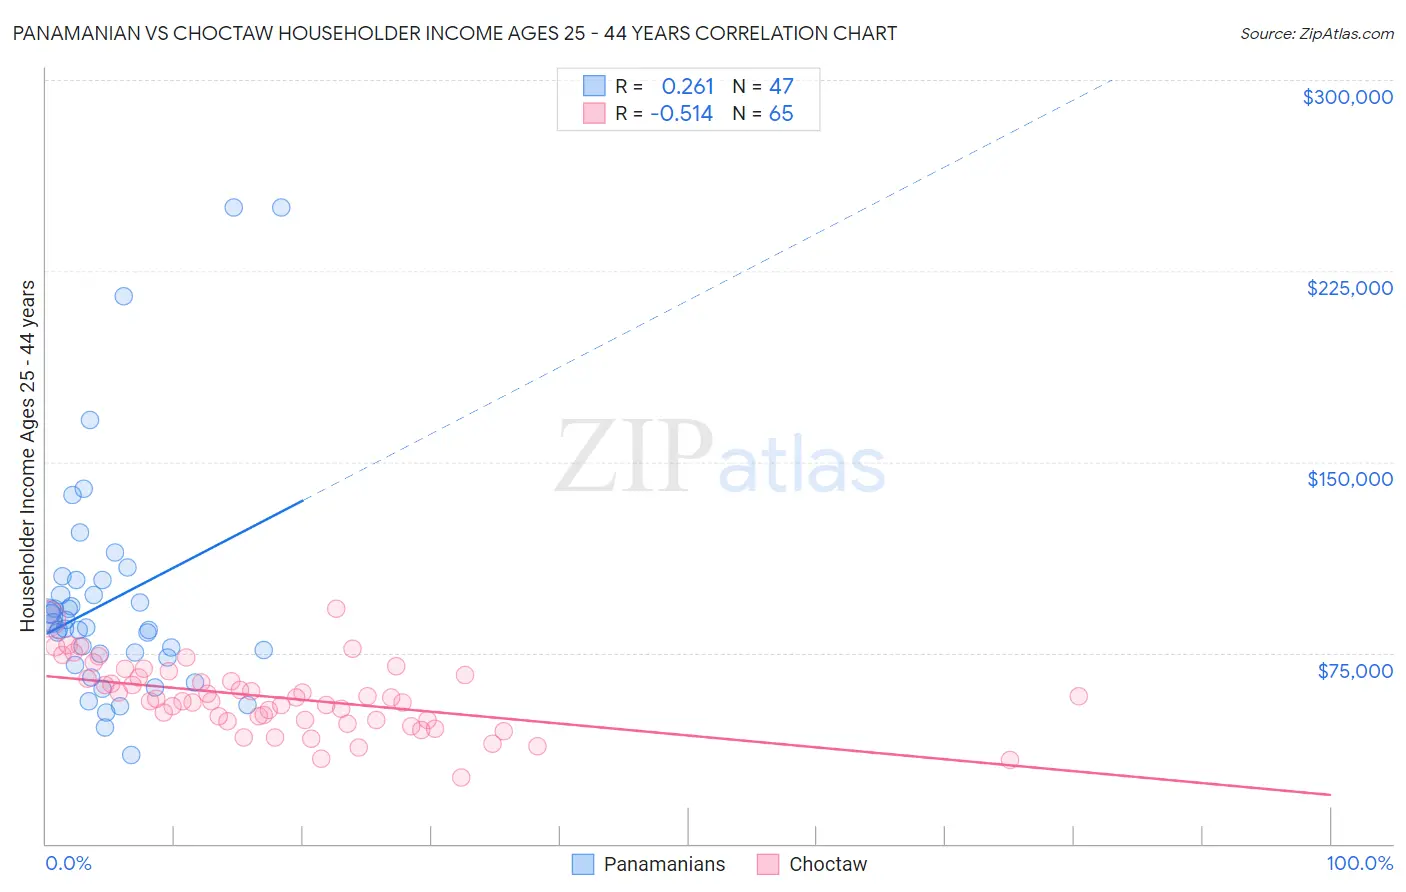 Panamanian vs Choctaw Householder Income Ages 25 - 44 years